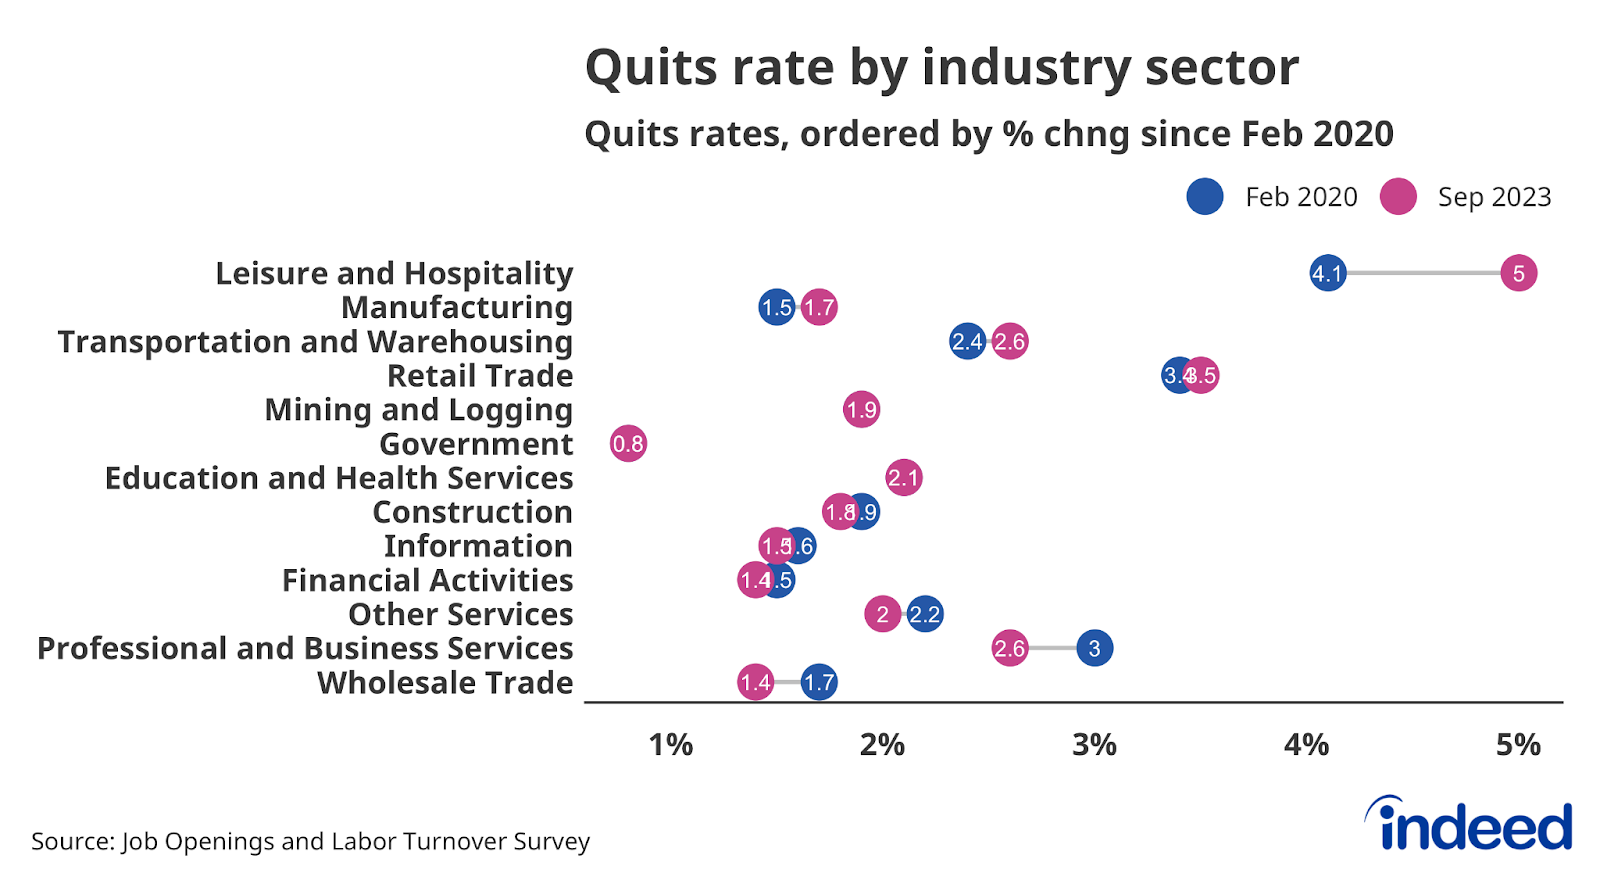 A chart titled “Quits rate by industry sector” shows the quits rate for a variety of industry sectors in September 2023 and February 2020. Most sectors had a quits rate in September very similar to their pre-pandemic rate, with a few exceptions. 